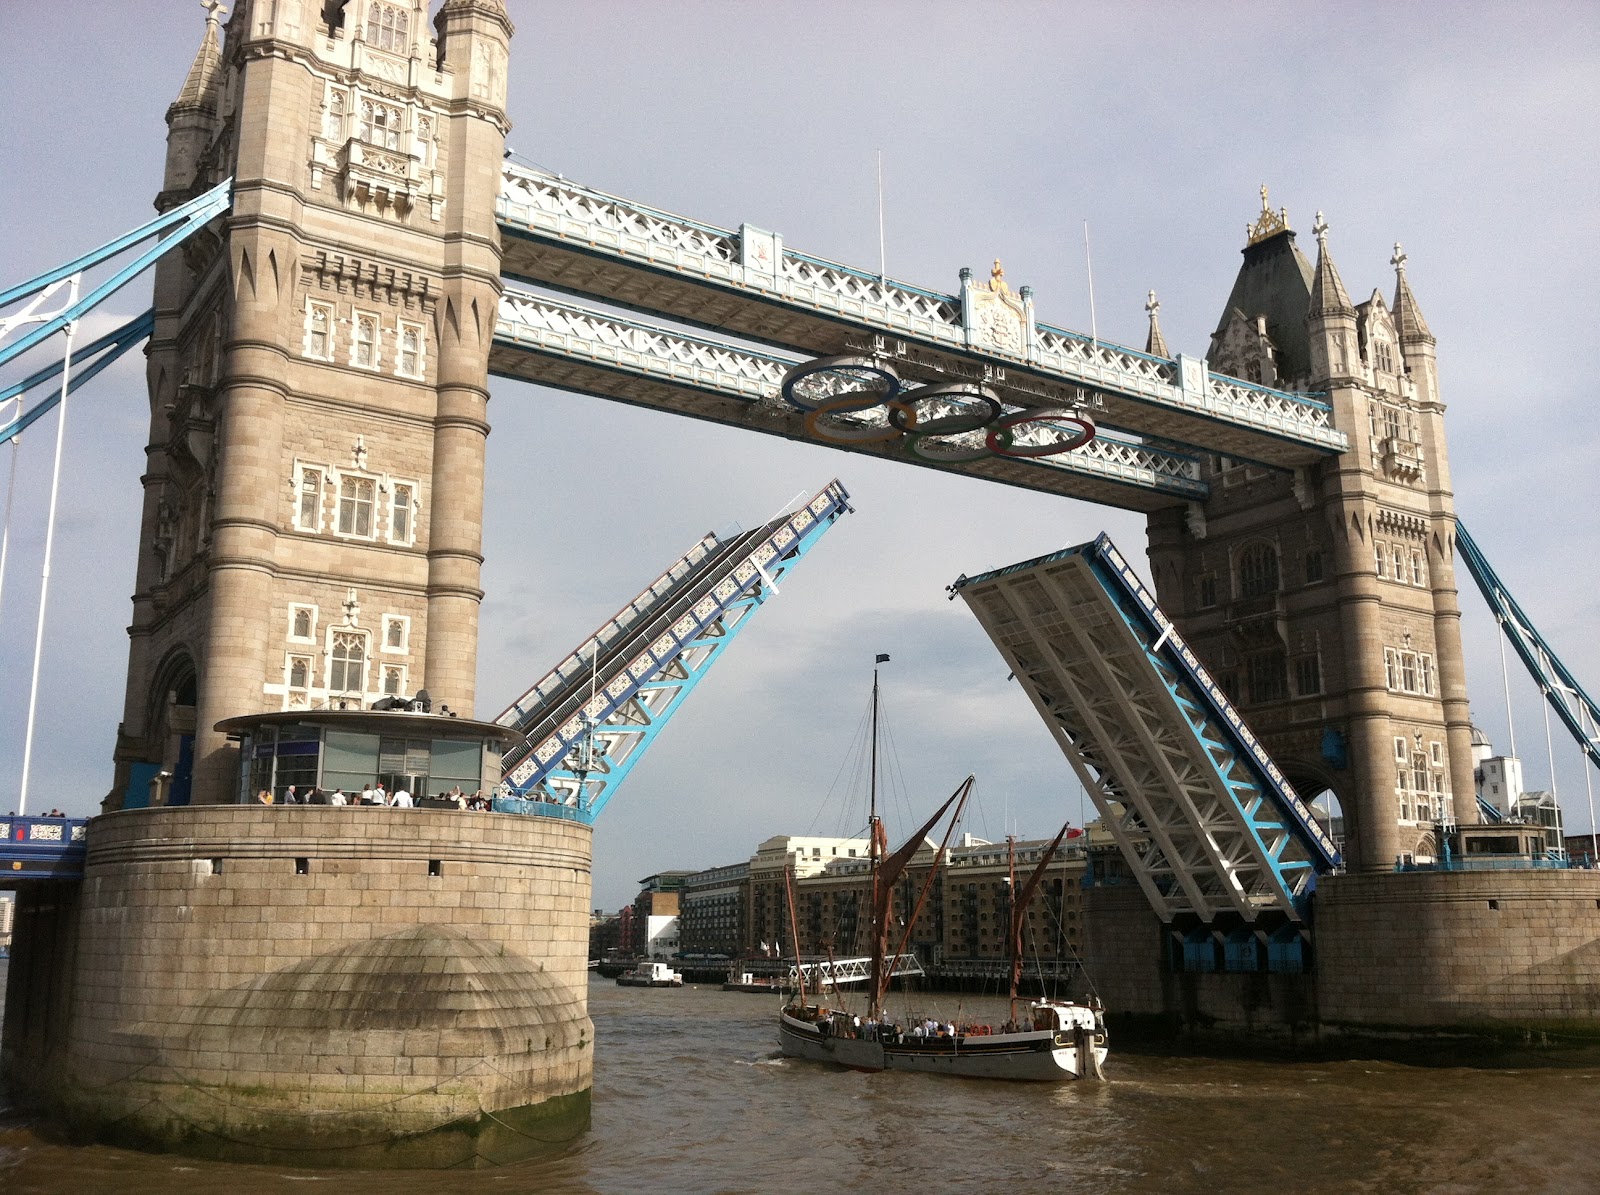 View of Tower Bridge rising to let a sailboat through (this happened 